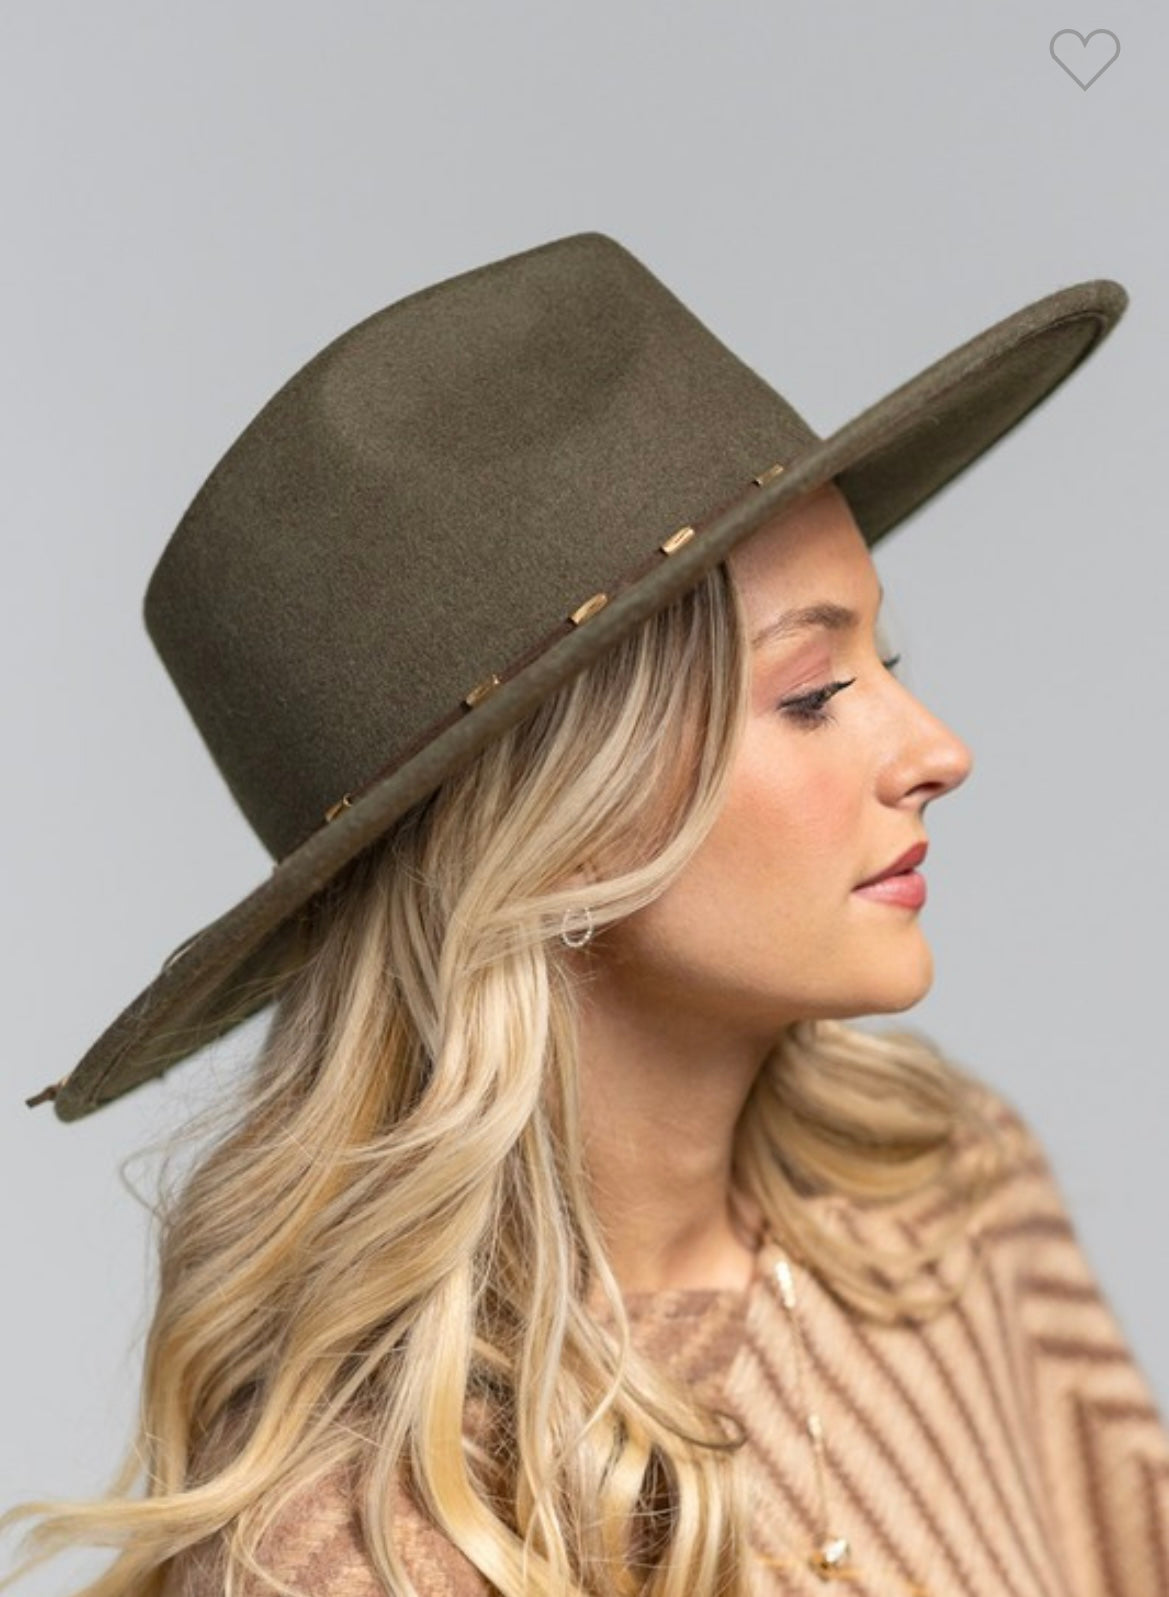 Wide brim Panama hat in a nice felt material and thin strap around inner brim with beads. Shown in olive.